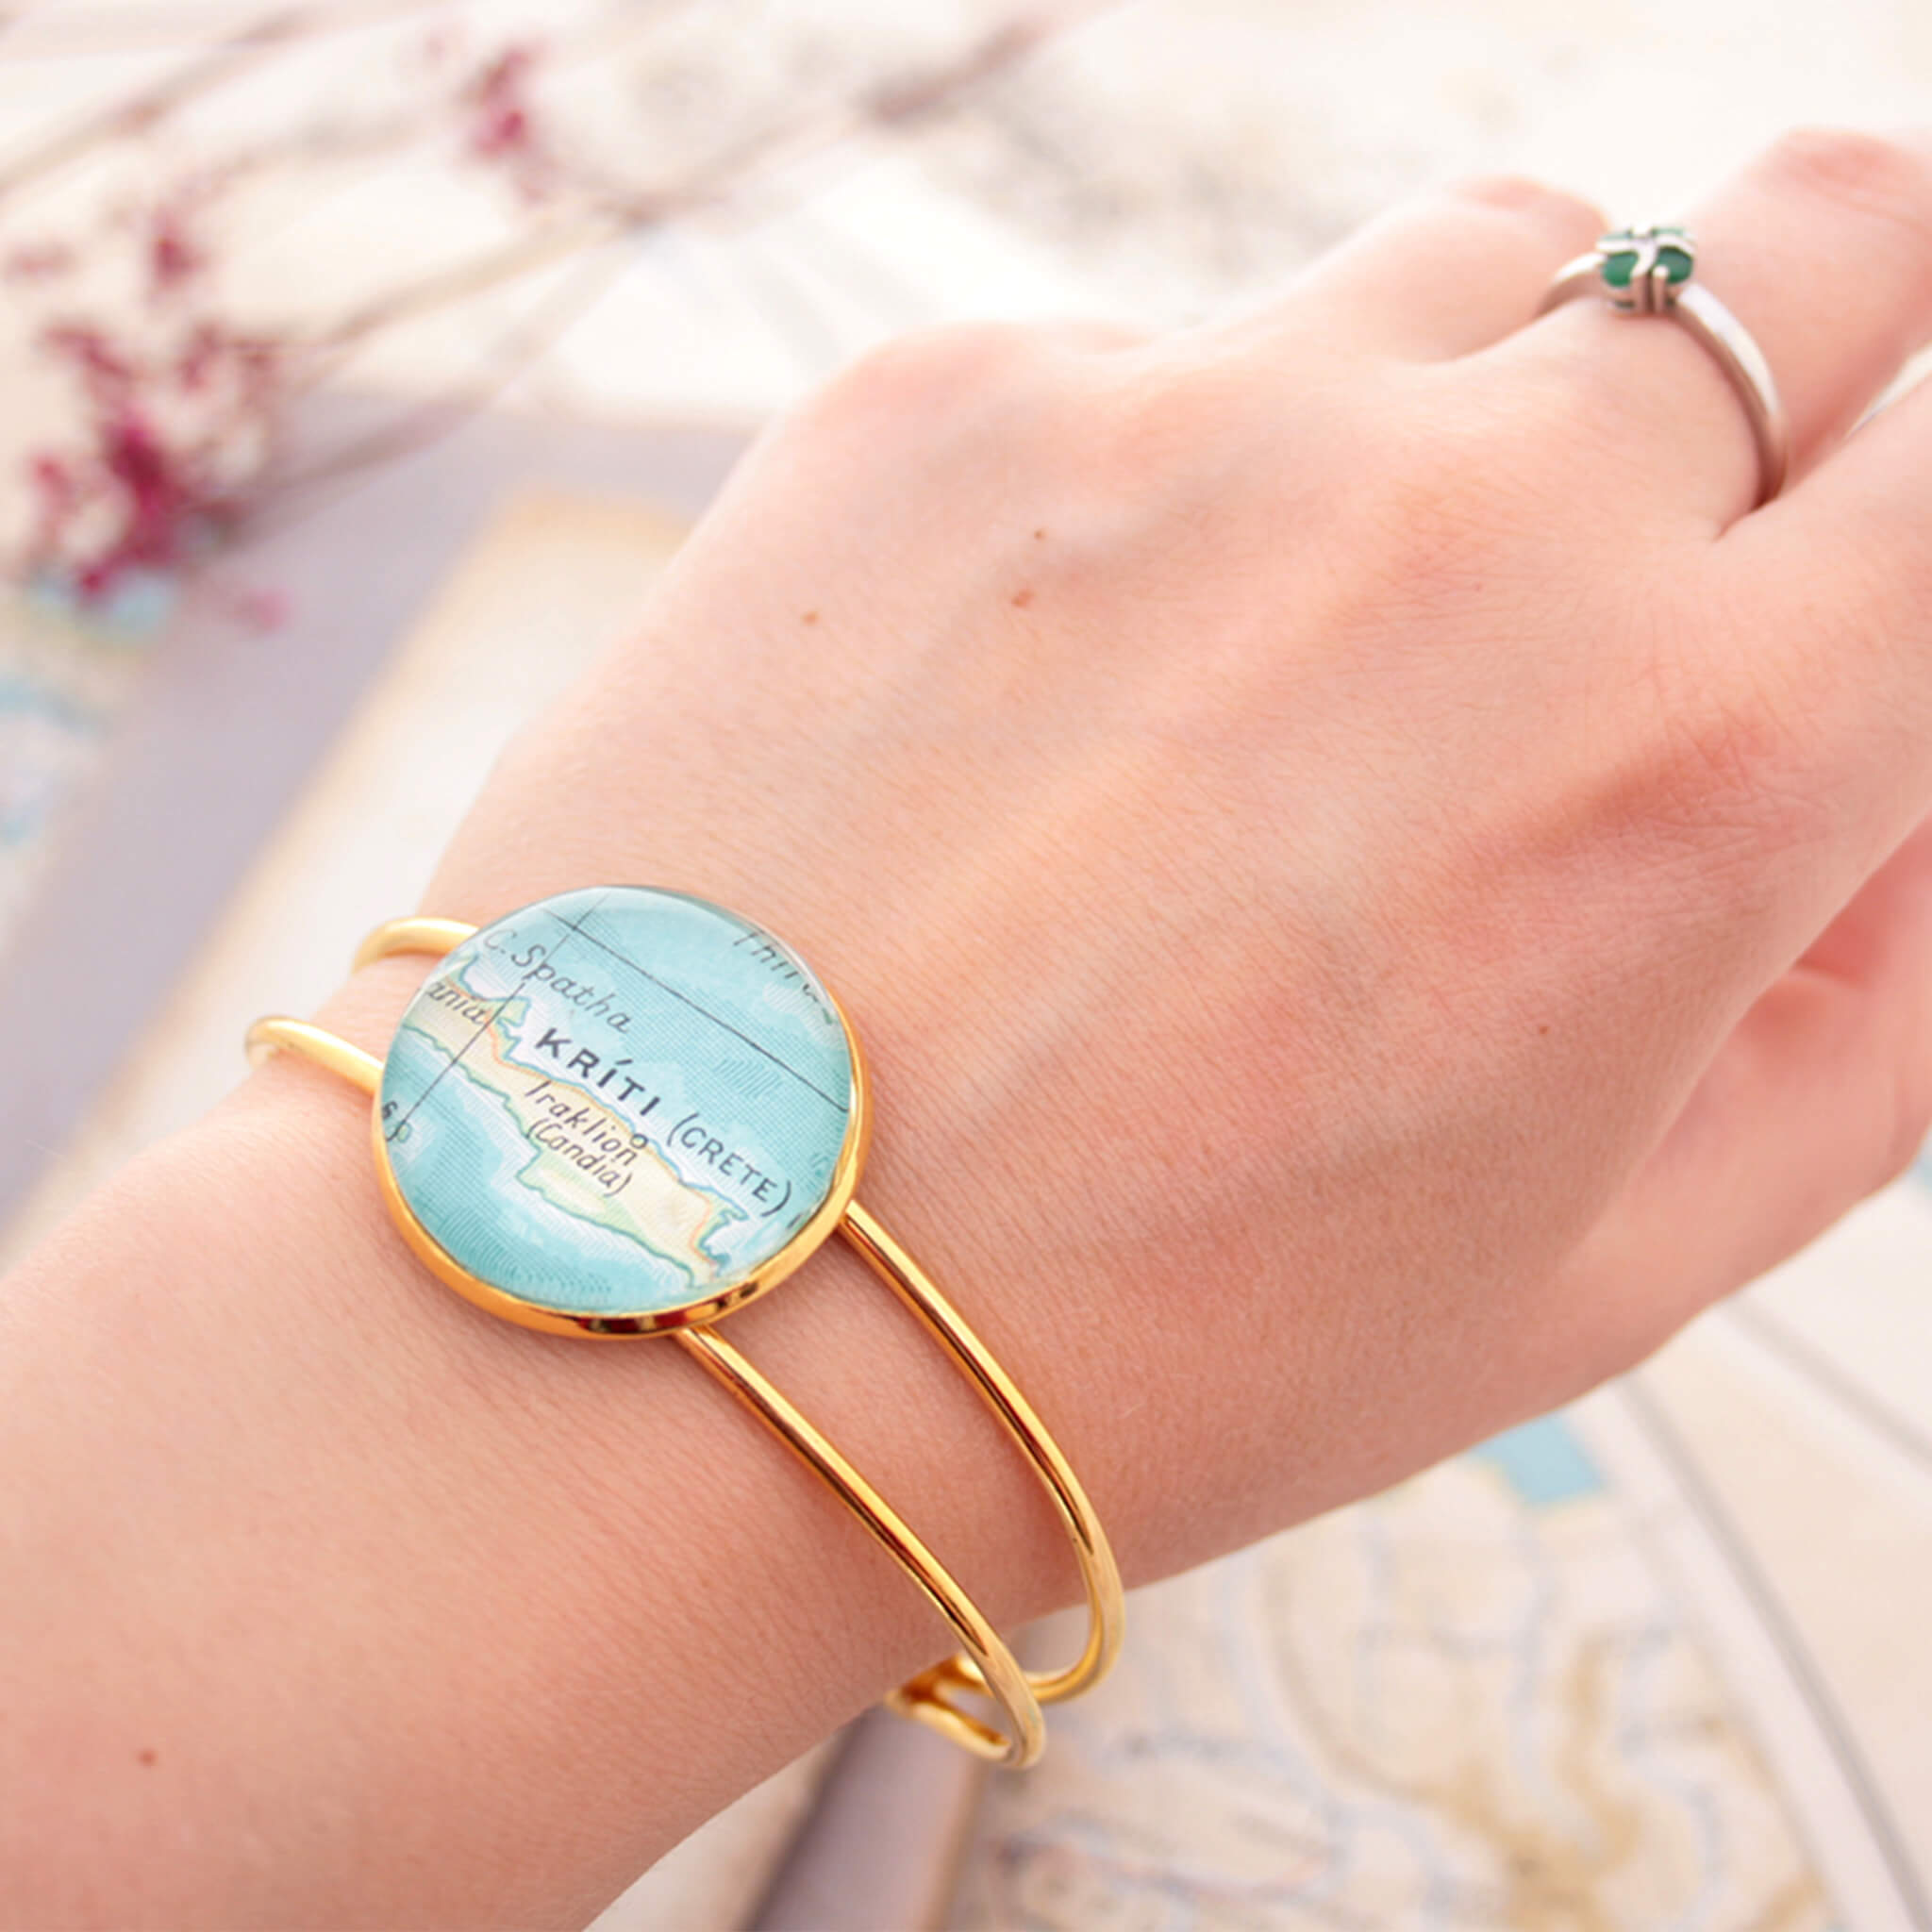 Gold bangle bracelet with geographical map of Kriti worn on hand